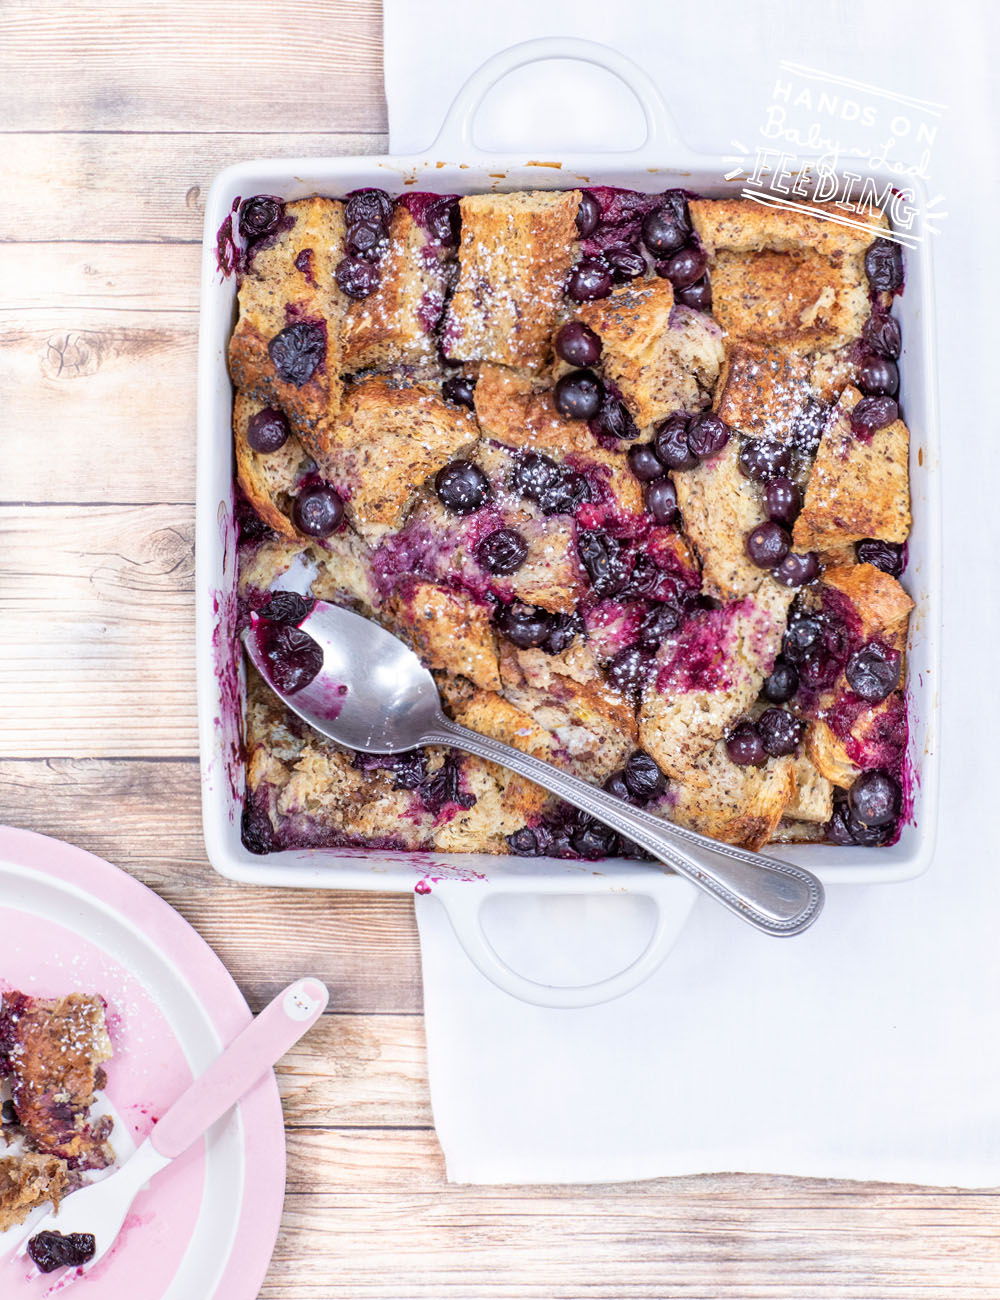 Lemon, Blueberries, and Chi seeds are just a few of the yummy healthy ingredients in this easy refined sugar free french toast bake! Simple step by step images make this baby led weaning recipe easy-to-make. Prepare ahead and bake the next morning for a quick and easy breakfast. #babyledweaning #babyledfeeding #frenchtoast #blueberryrecipe #mealprep